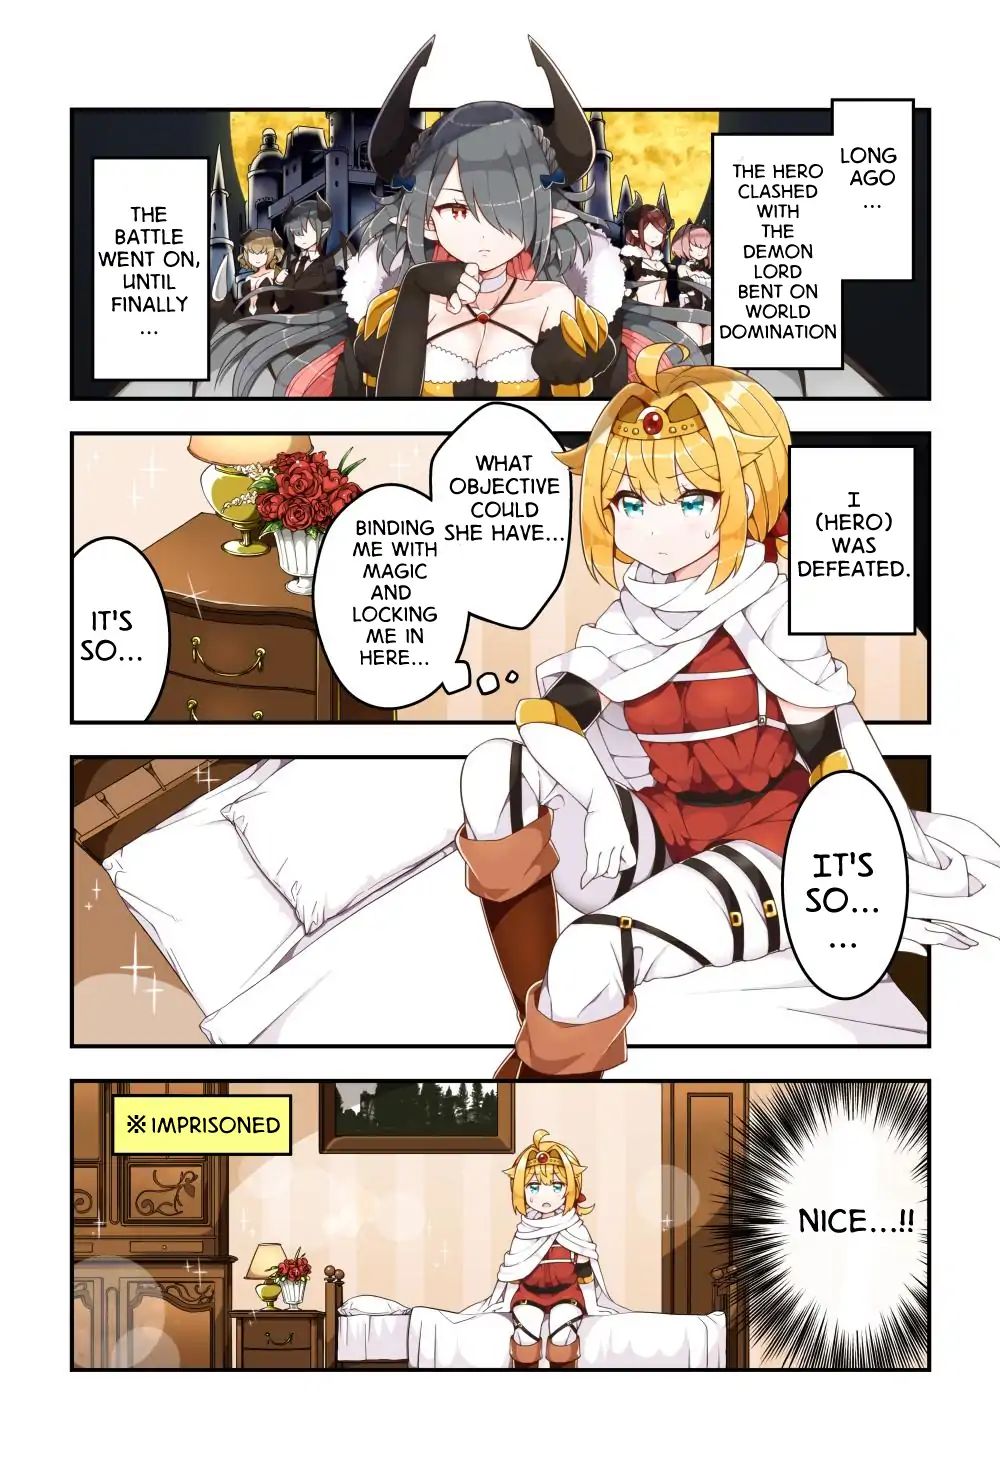 Story Of The Demon Lord Who Wants To Yuri-Marry The Hero Chapter 0.5 #1